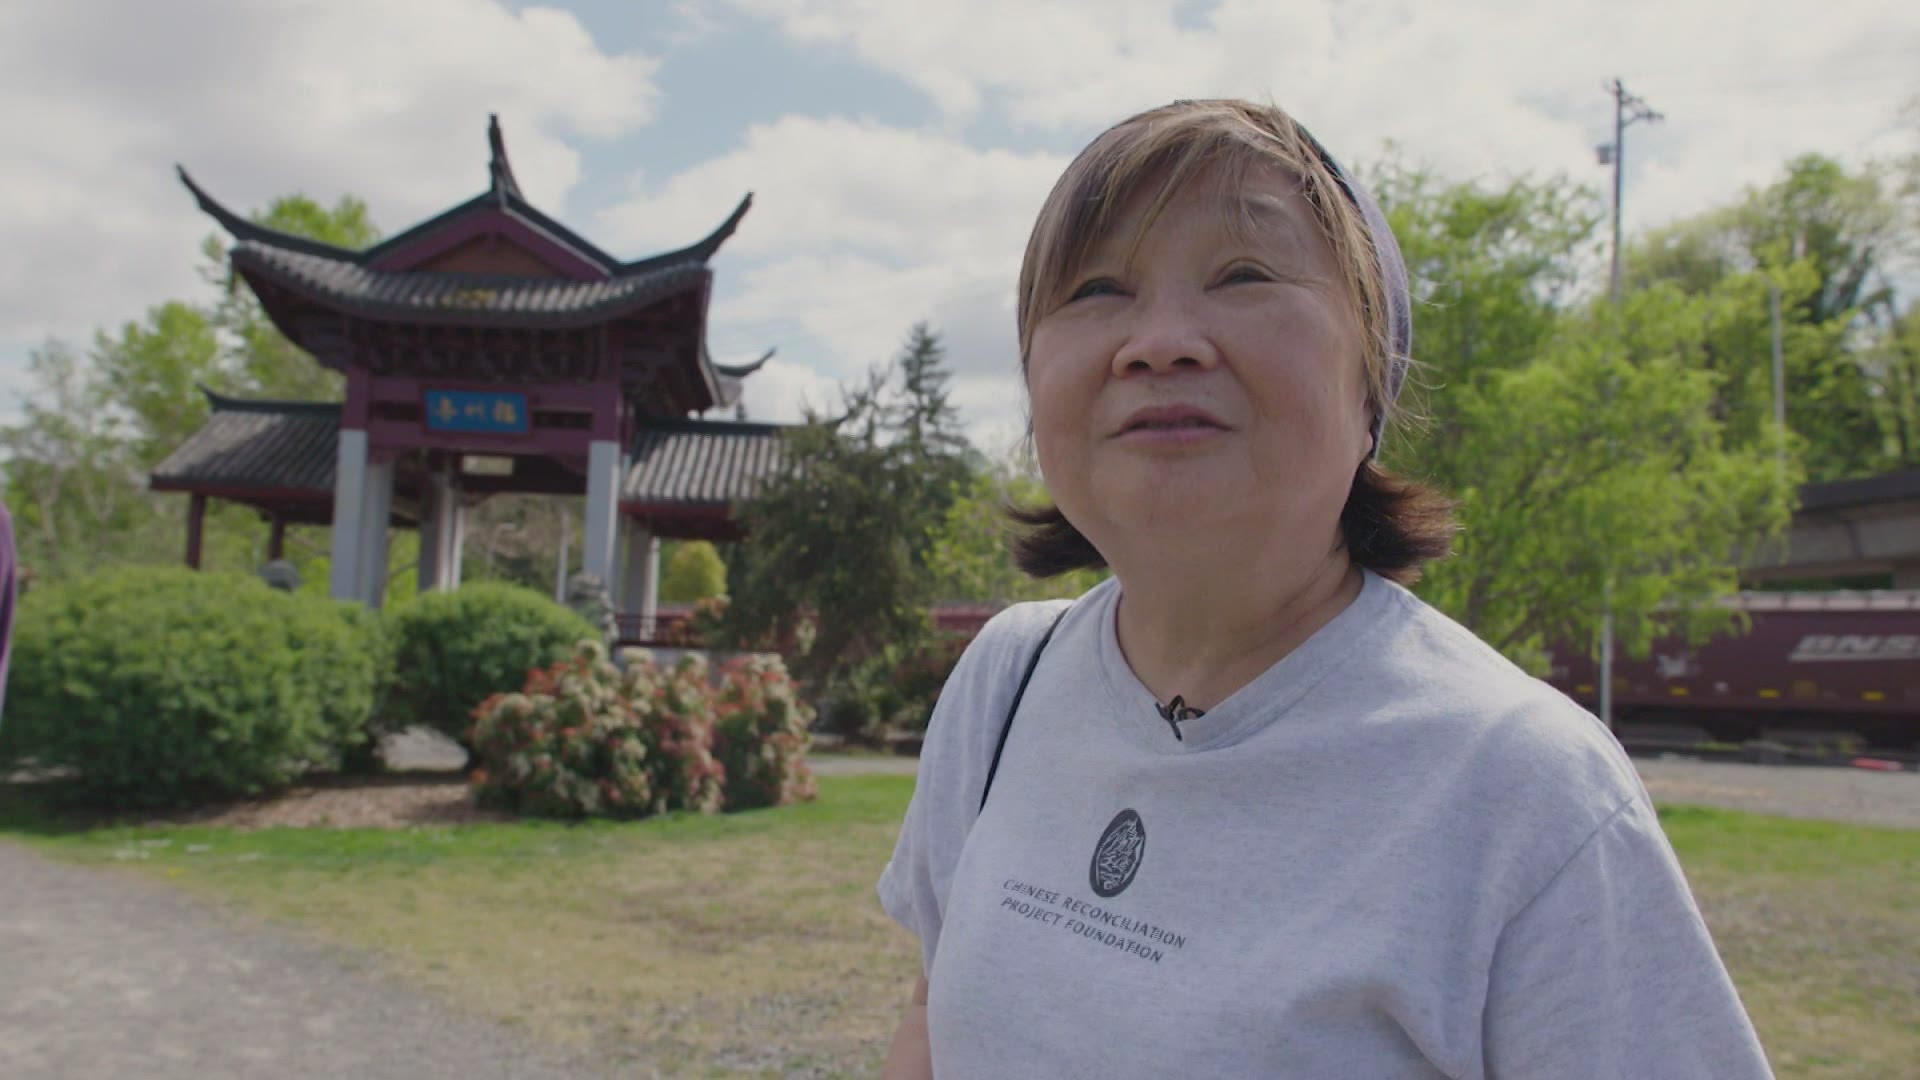 For some, Tacoma's Chinese expulsion of 1885 continues to be a source of pain, especially in light of recent reports of hate crimes against Asian Americans.